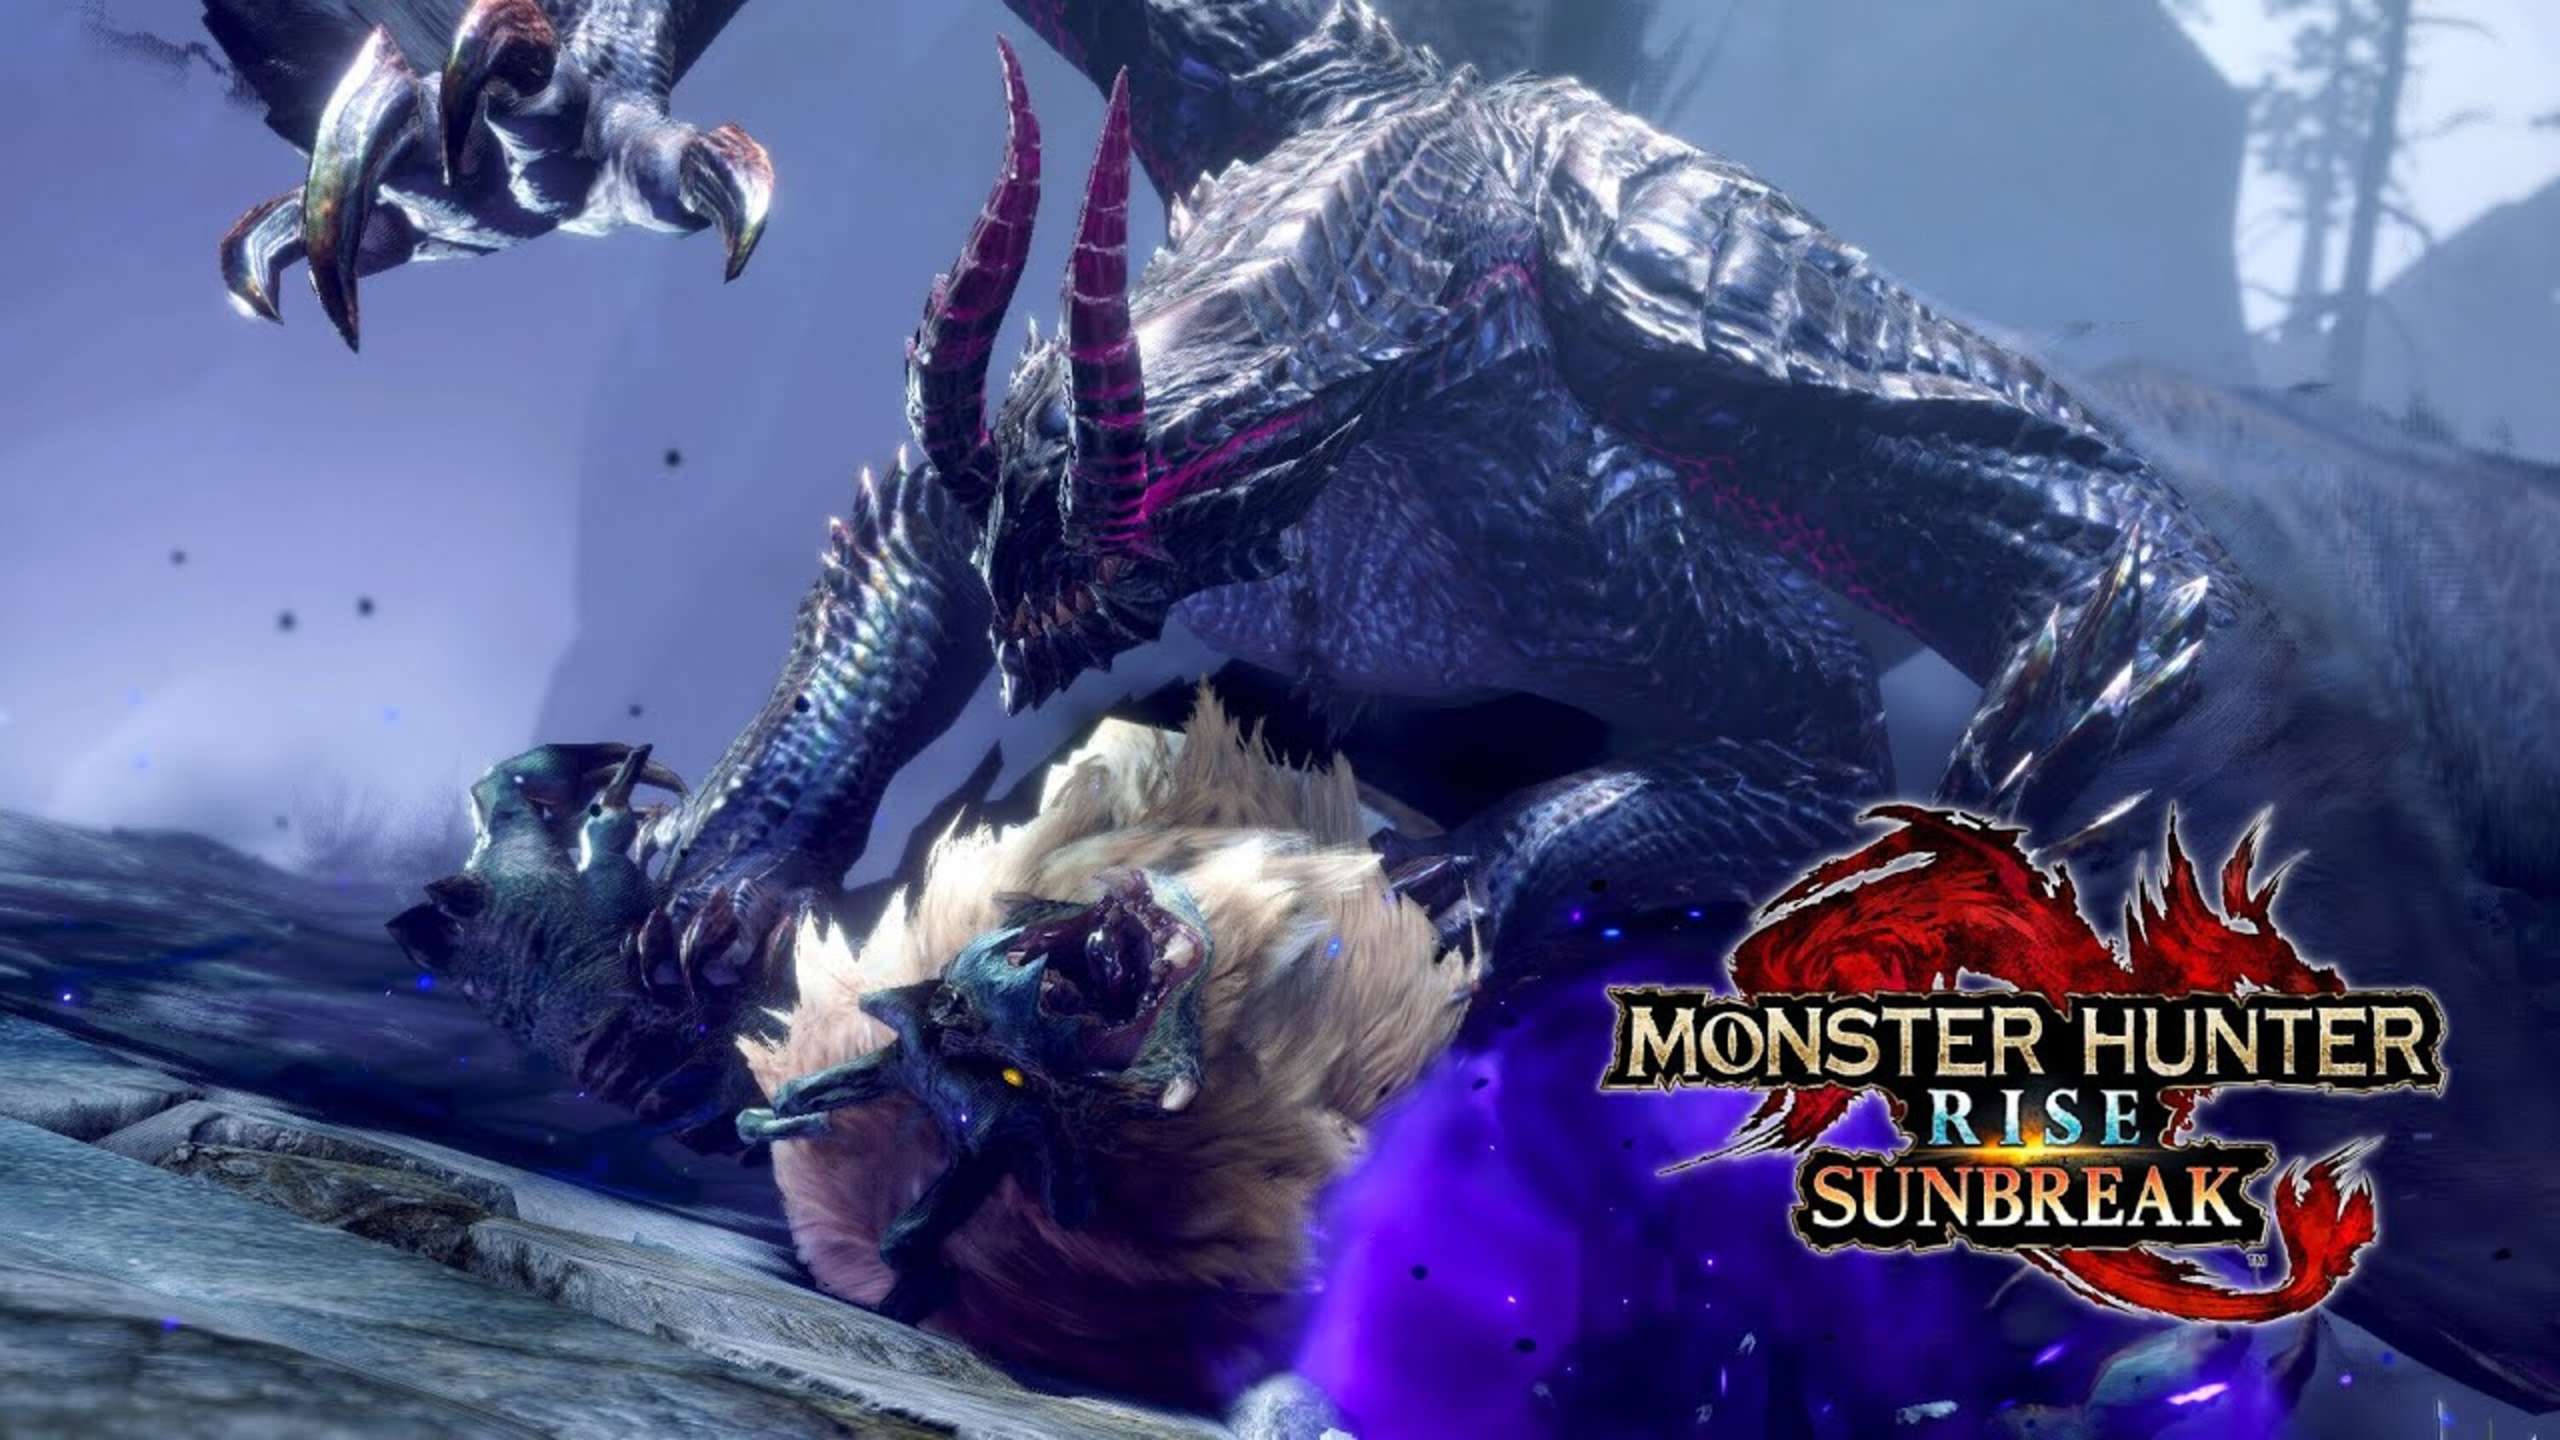 The First Update To Monster Hunter: Rise Sunbreak Introduces New Creatures And In-Game Missions